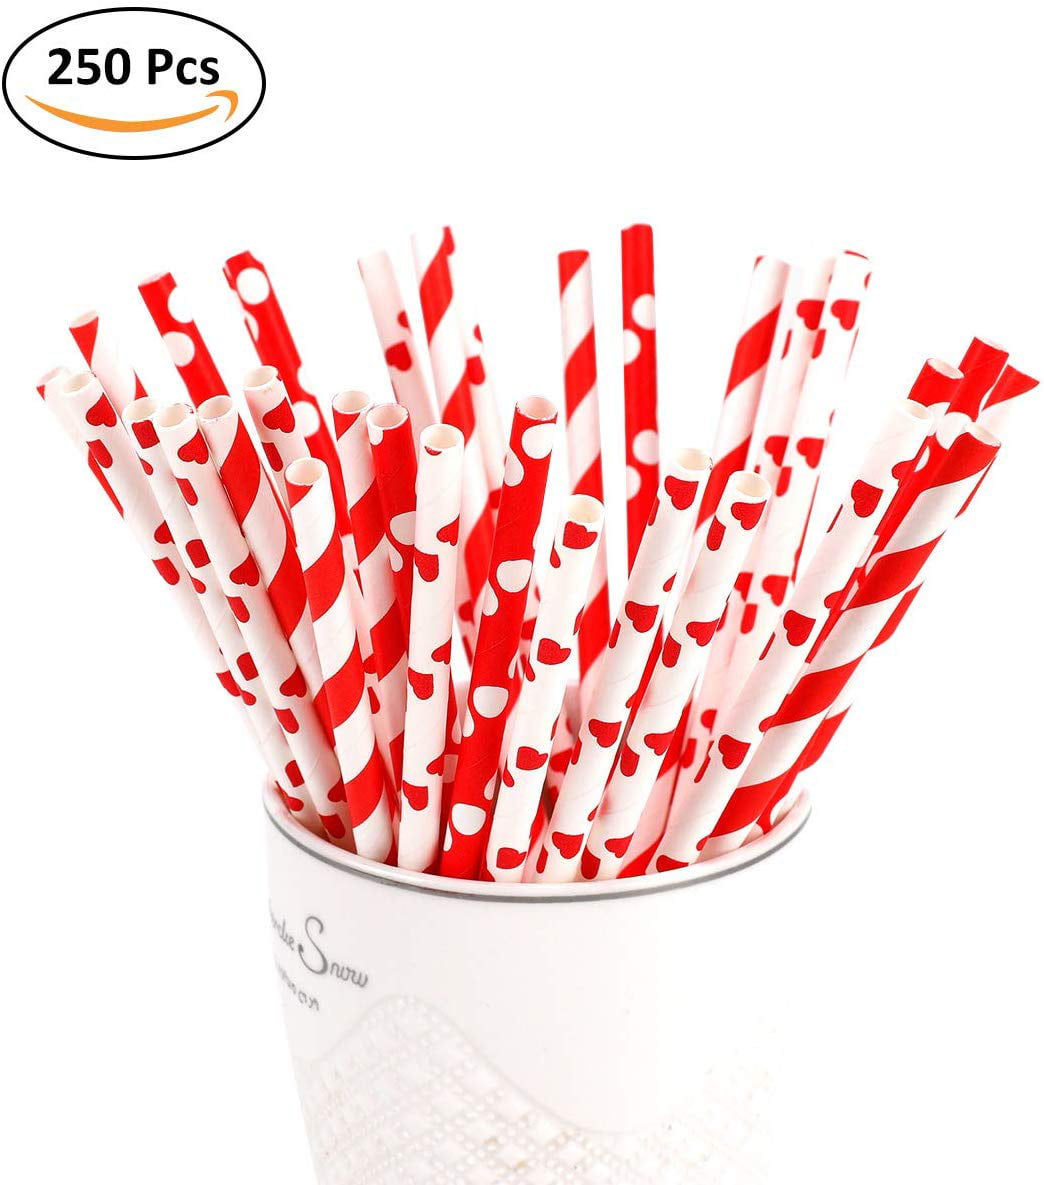 8" Red & White Striped Paper Drinking Straws Biodegradable Boxes of 250 